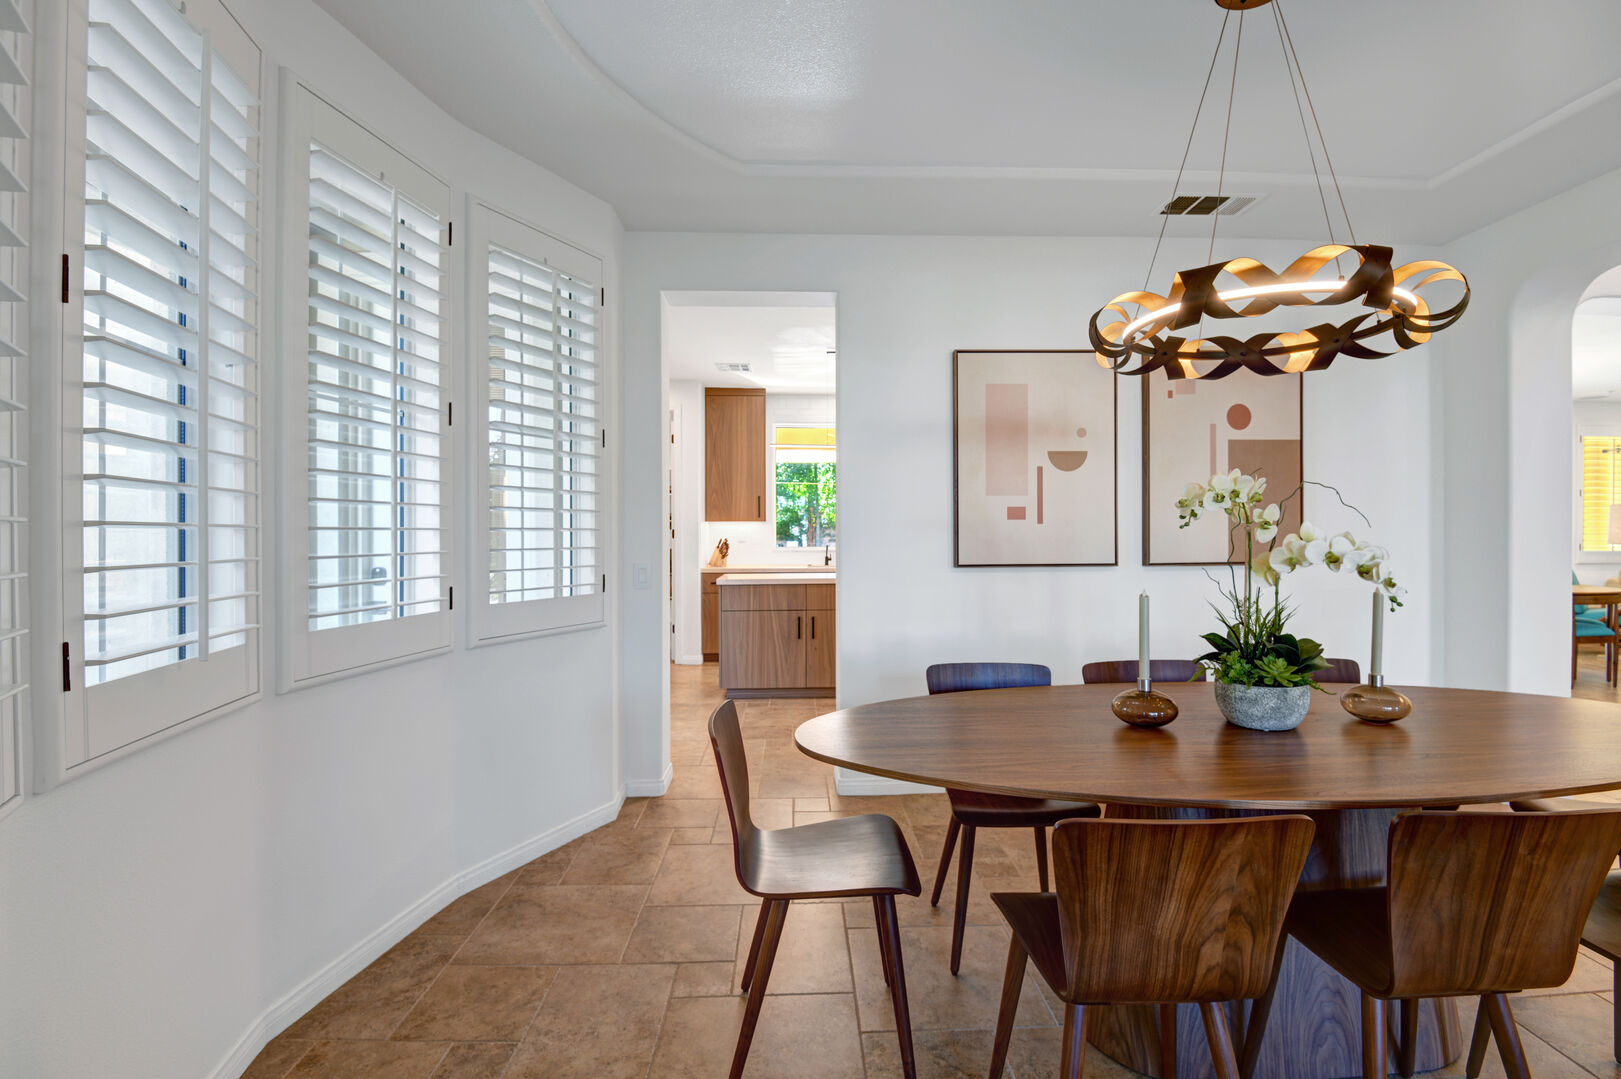 Bask in the glow of natural lighting in the dining area.